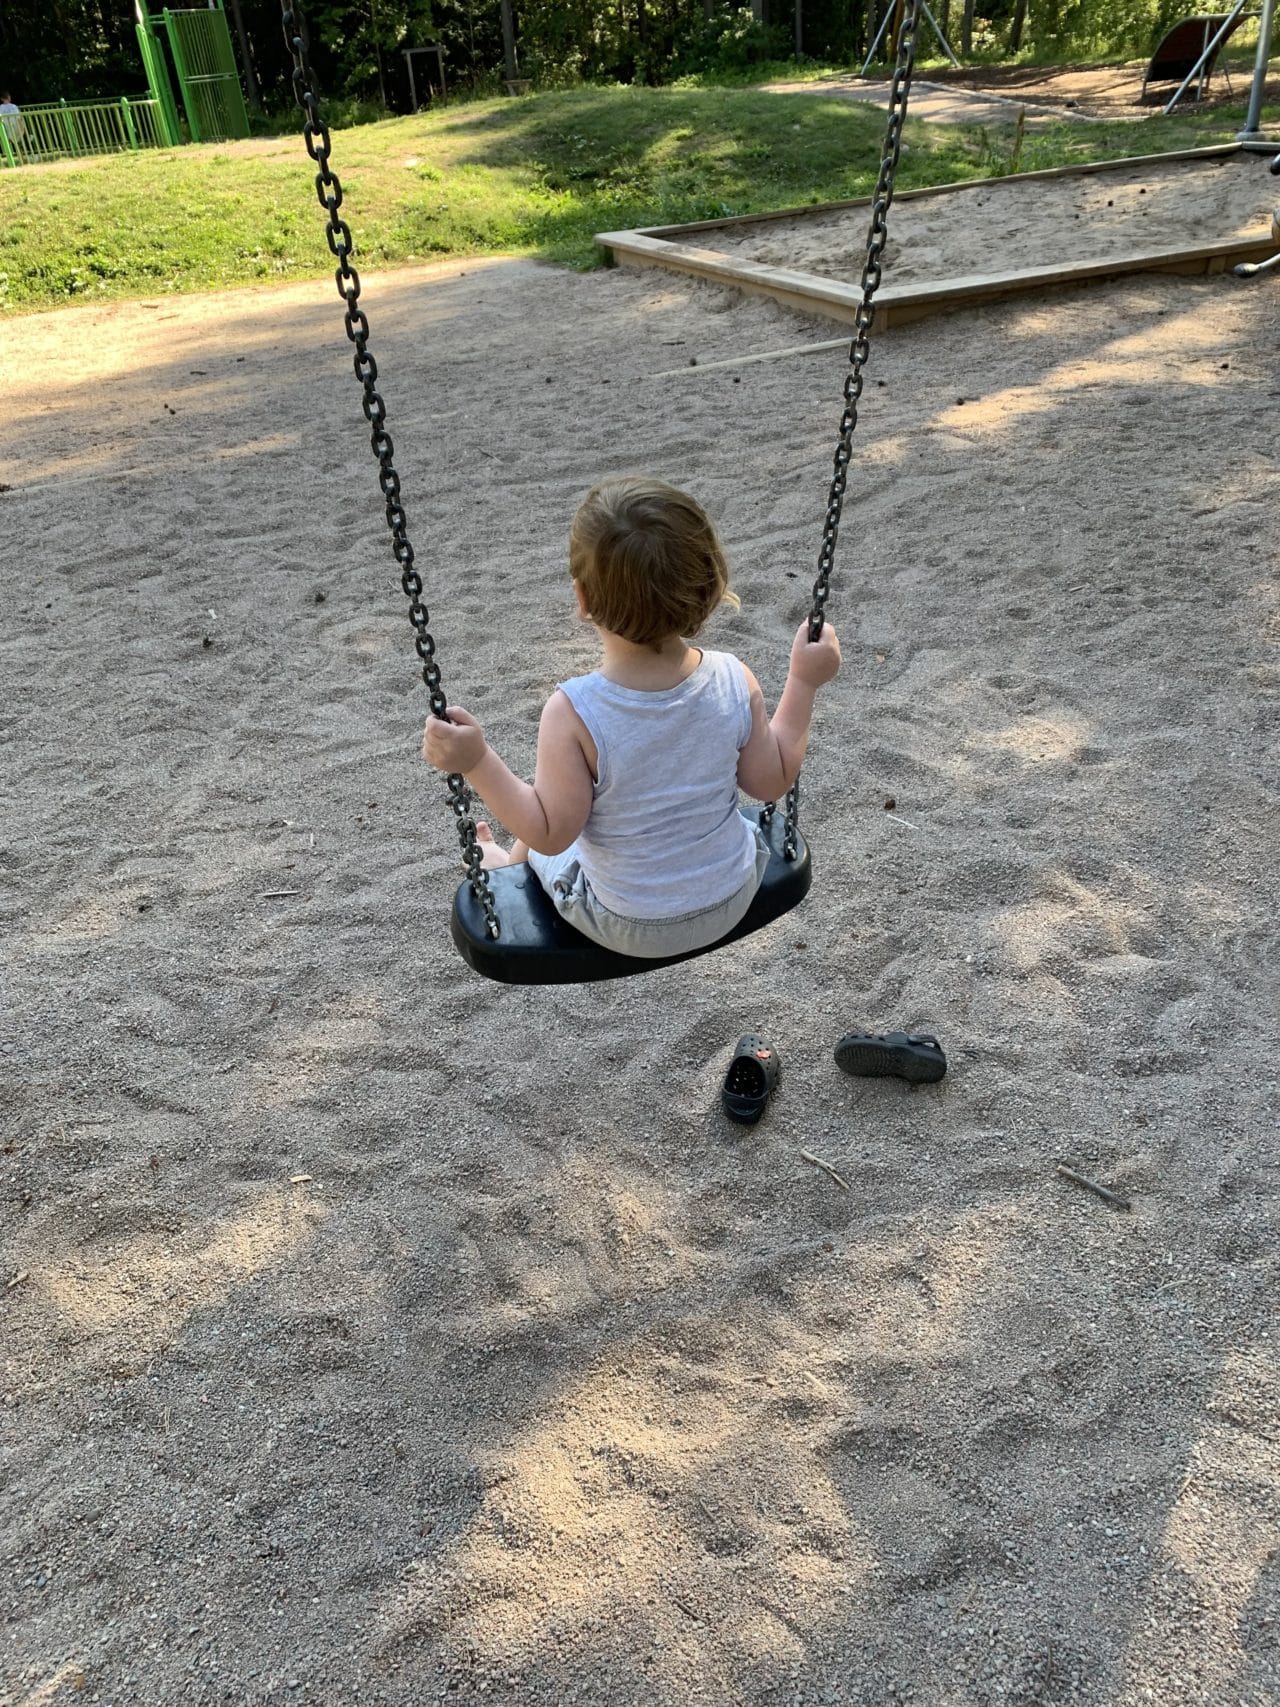 Small Kid Swinging On A Swing In Playground